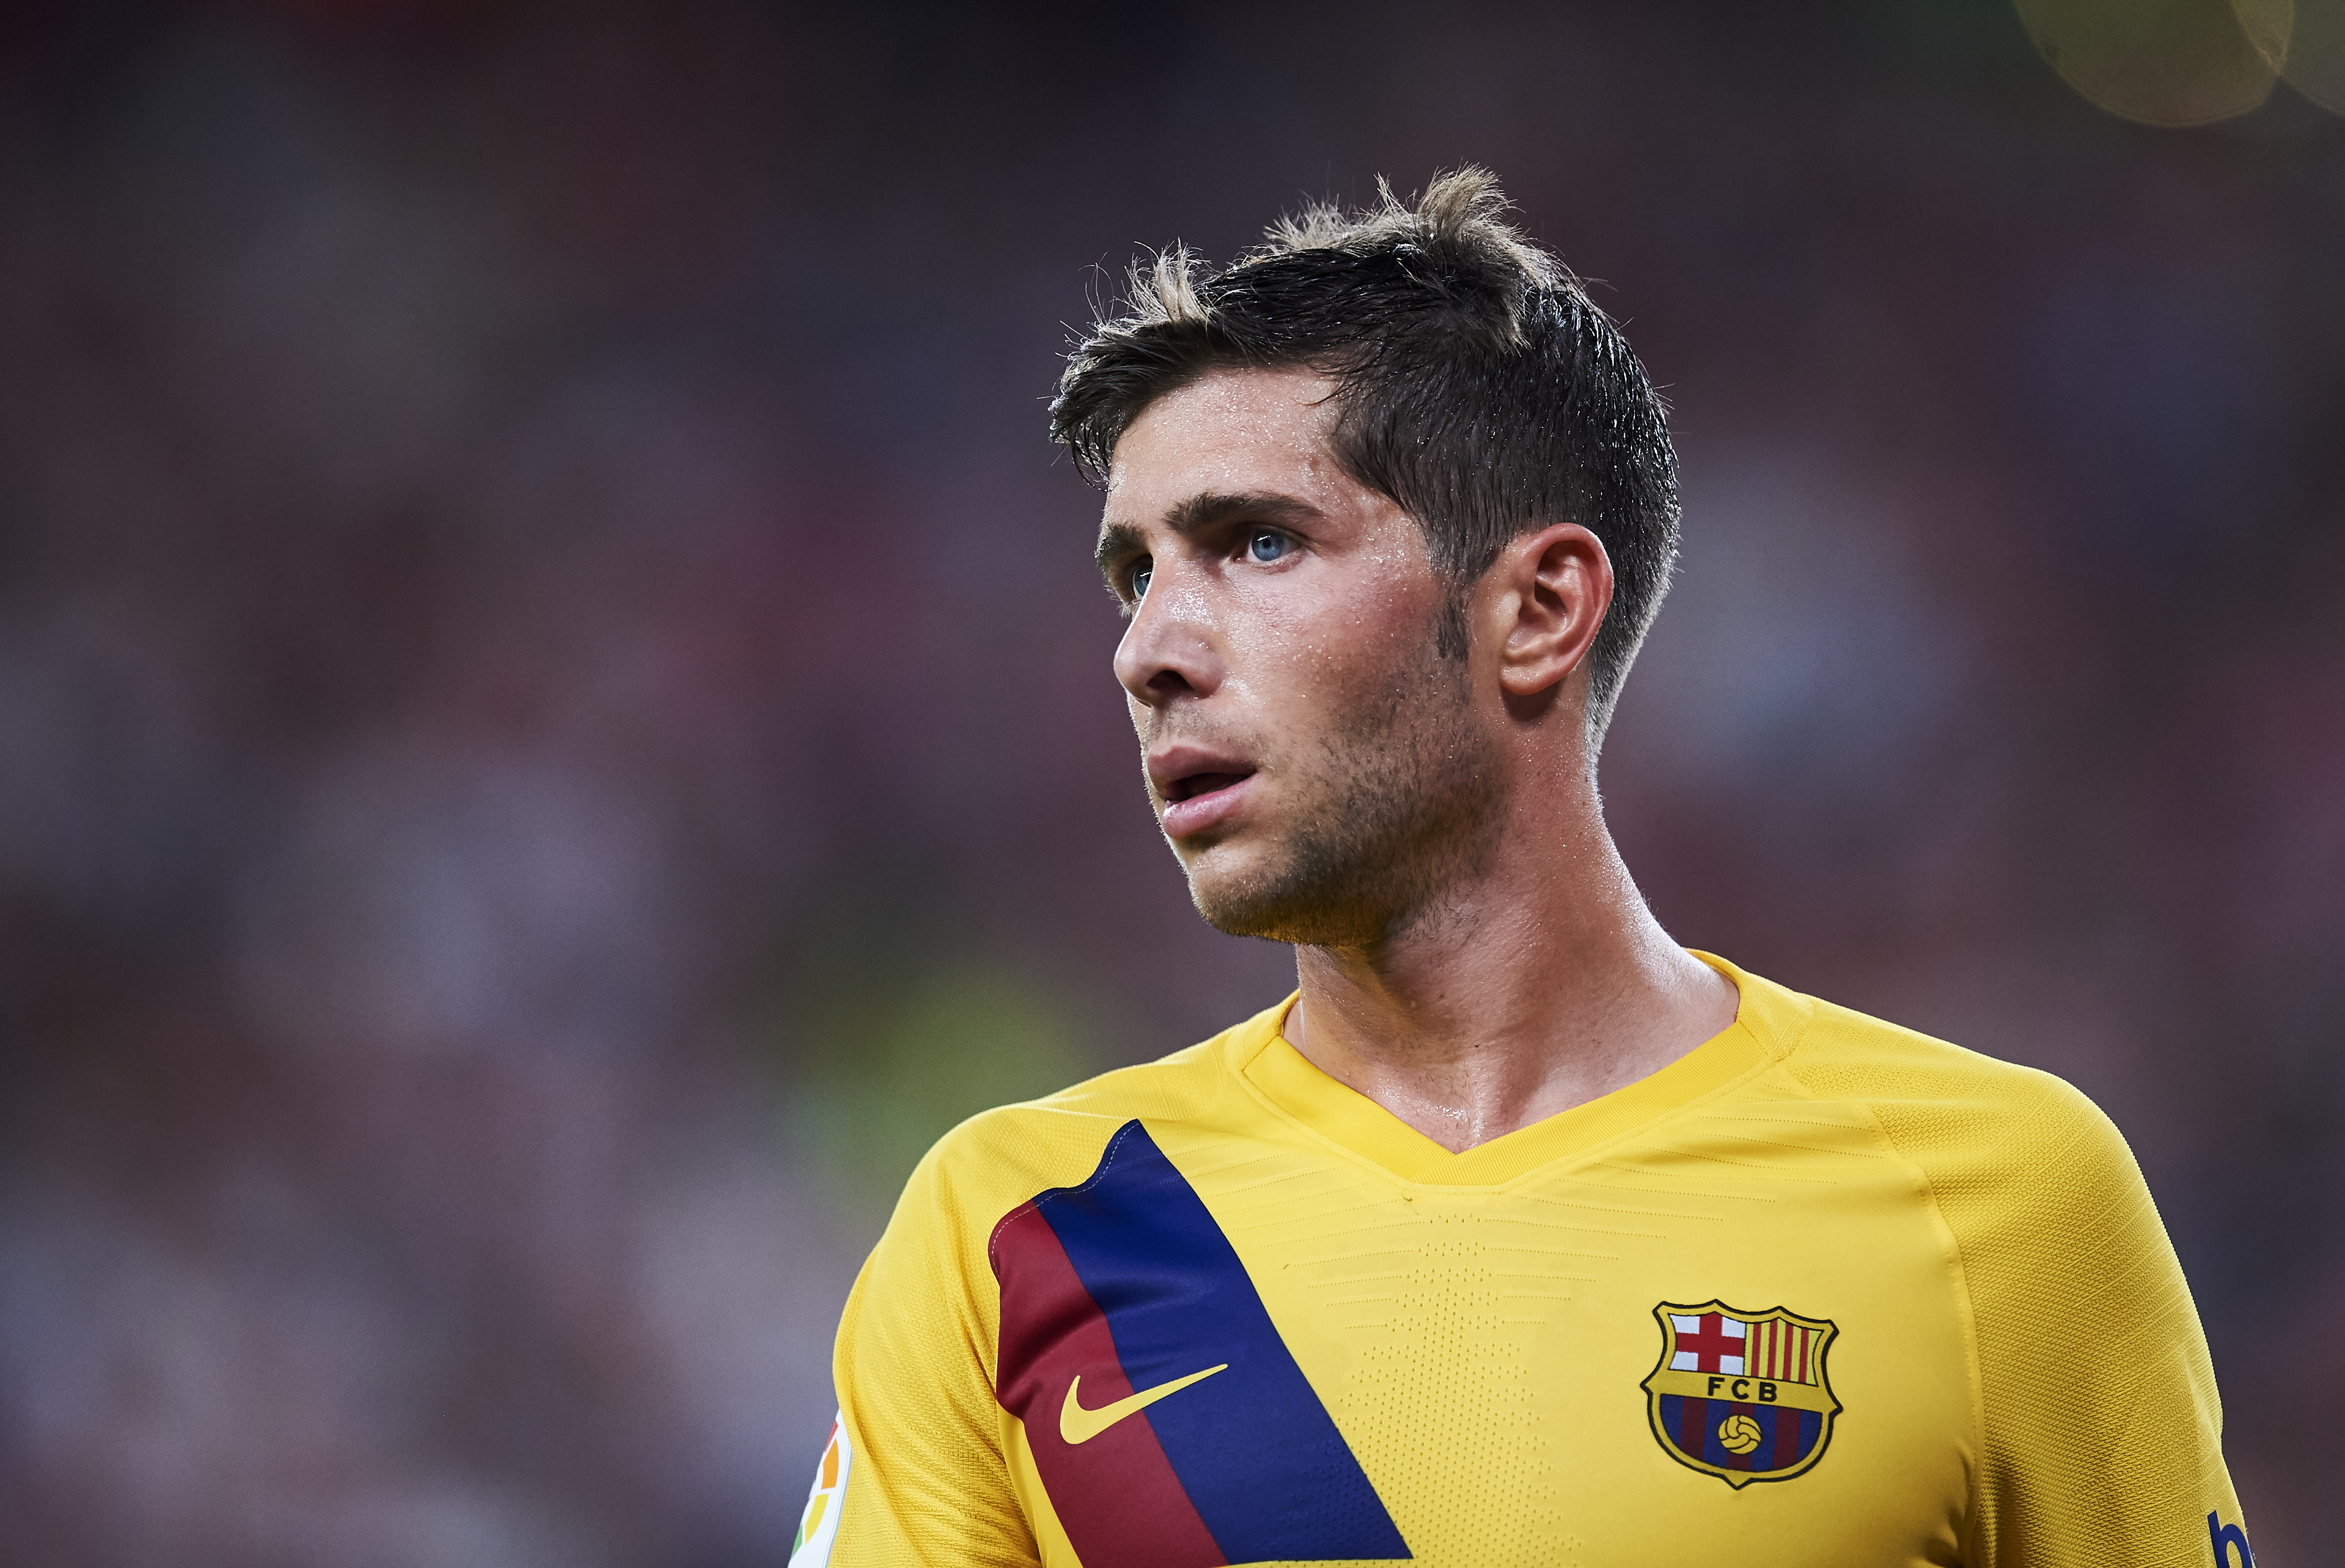 BILBAO, SPAIN - AUGUST 16: Sergi Roberto of FC Barcelona looks on during the Liga match between Athletic Club and FC Barcelona at San Mames Stadium on August 16, 2019 in Bilbao, Spain. (Photo by Juan Manuel Serrano Arce/Getty Images)